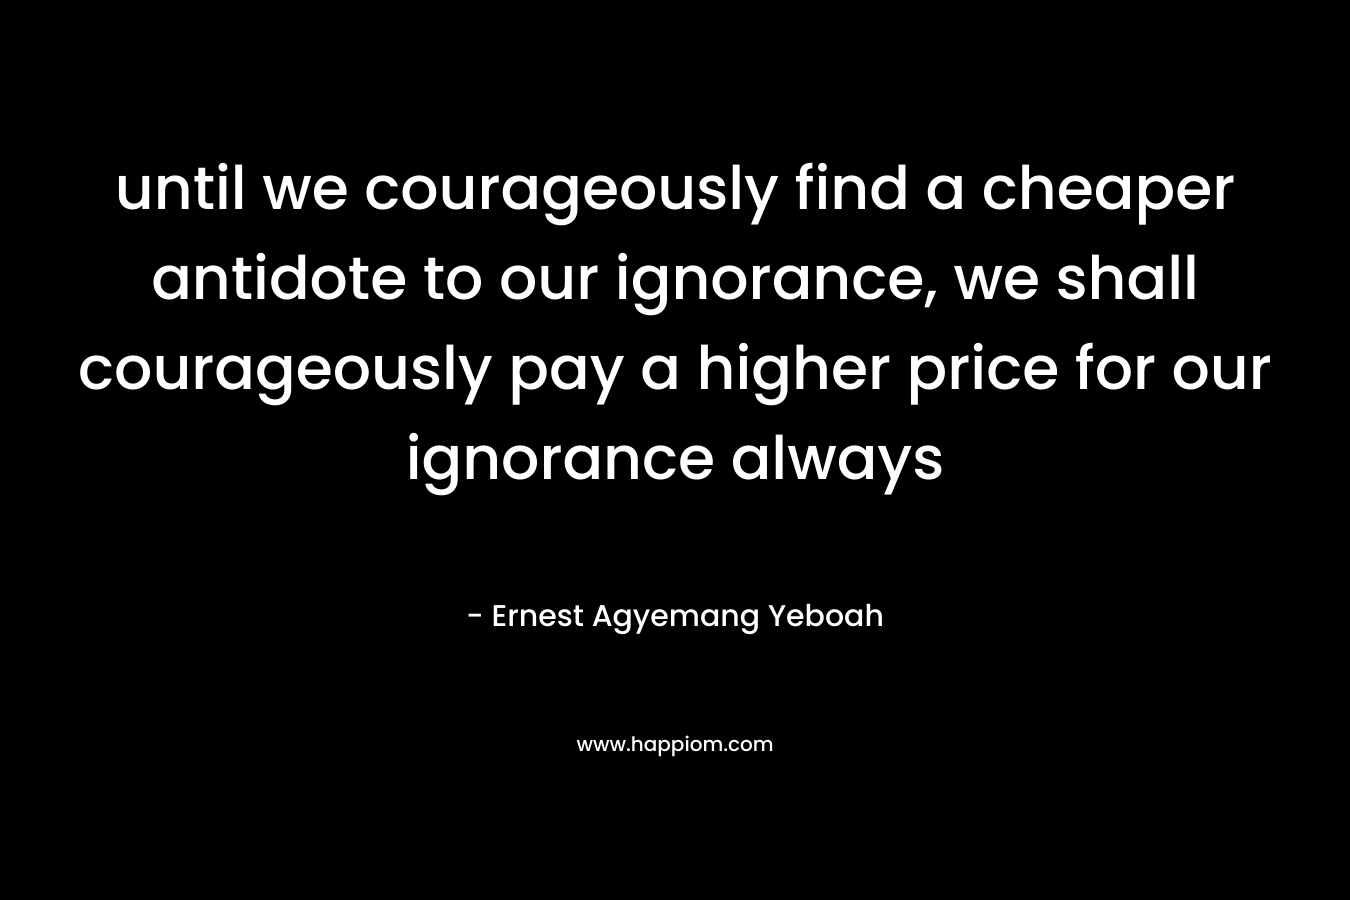 until we courageously find a cheaper antidote to our ignorance, we shall courageously pay a higher price for our ignorance always